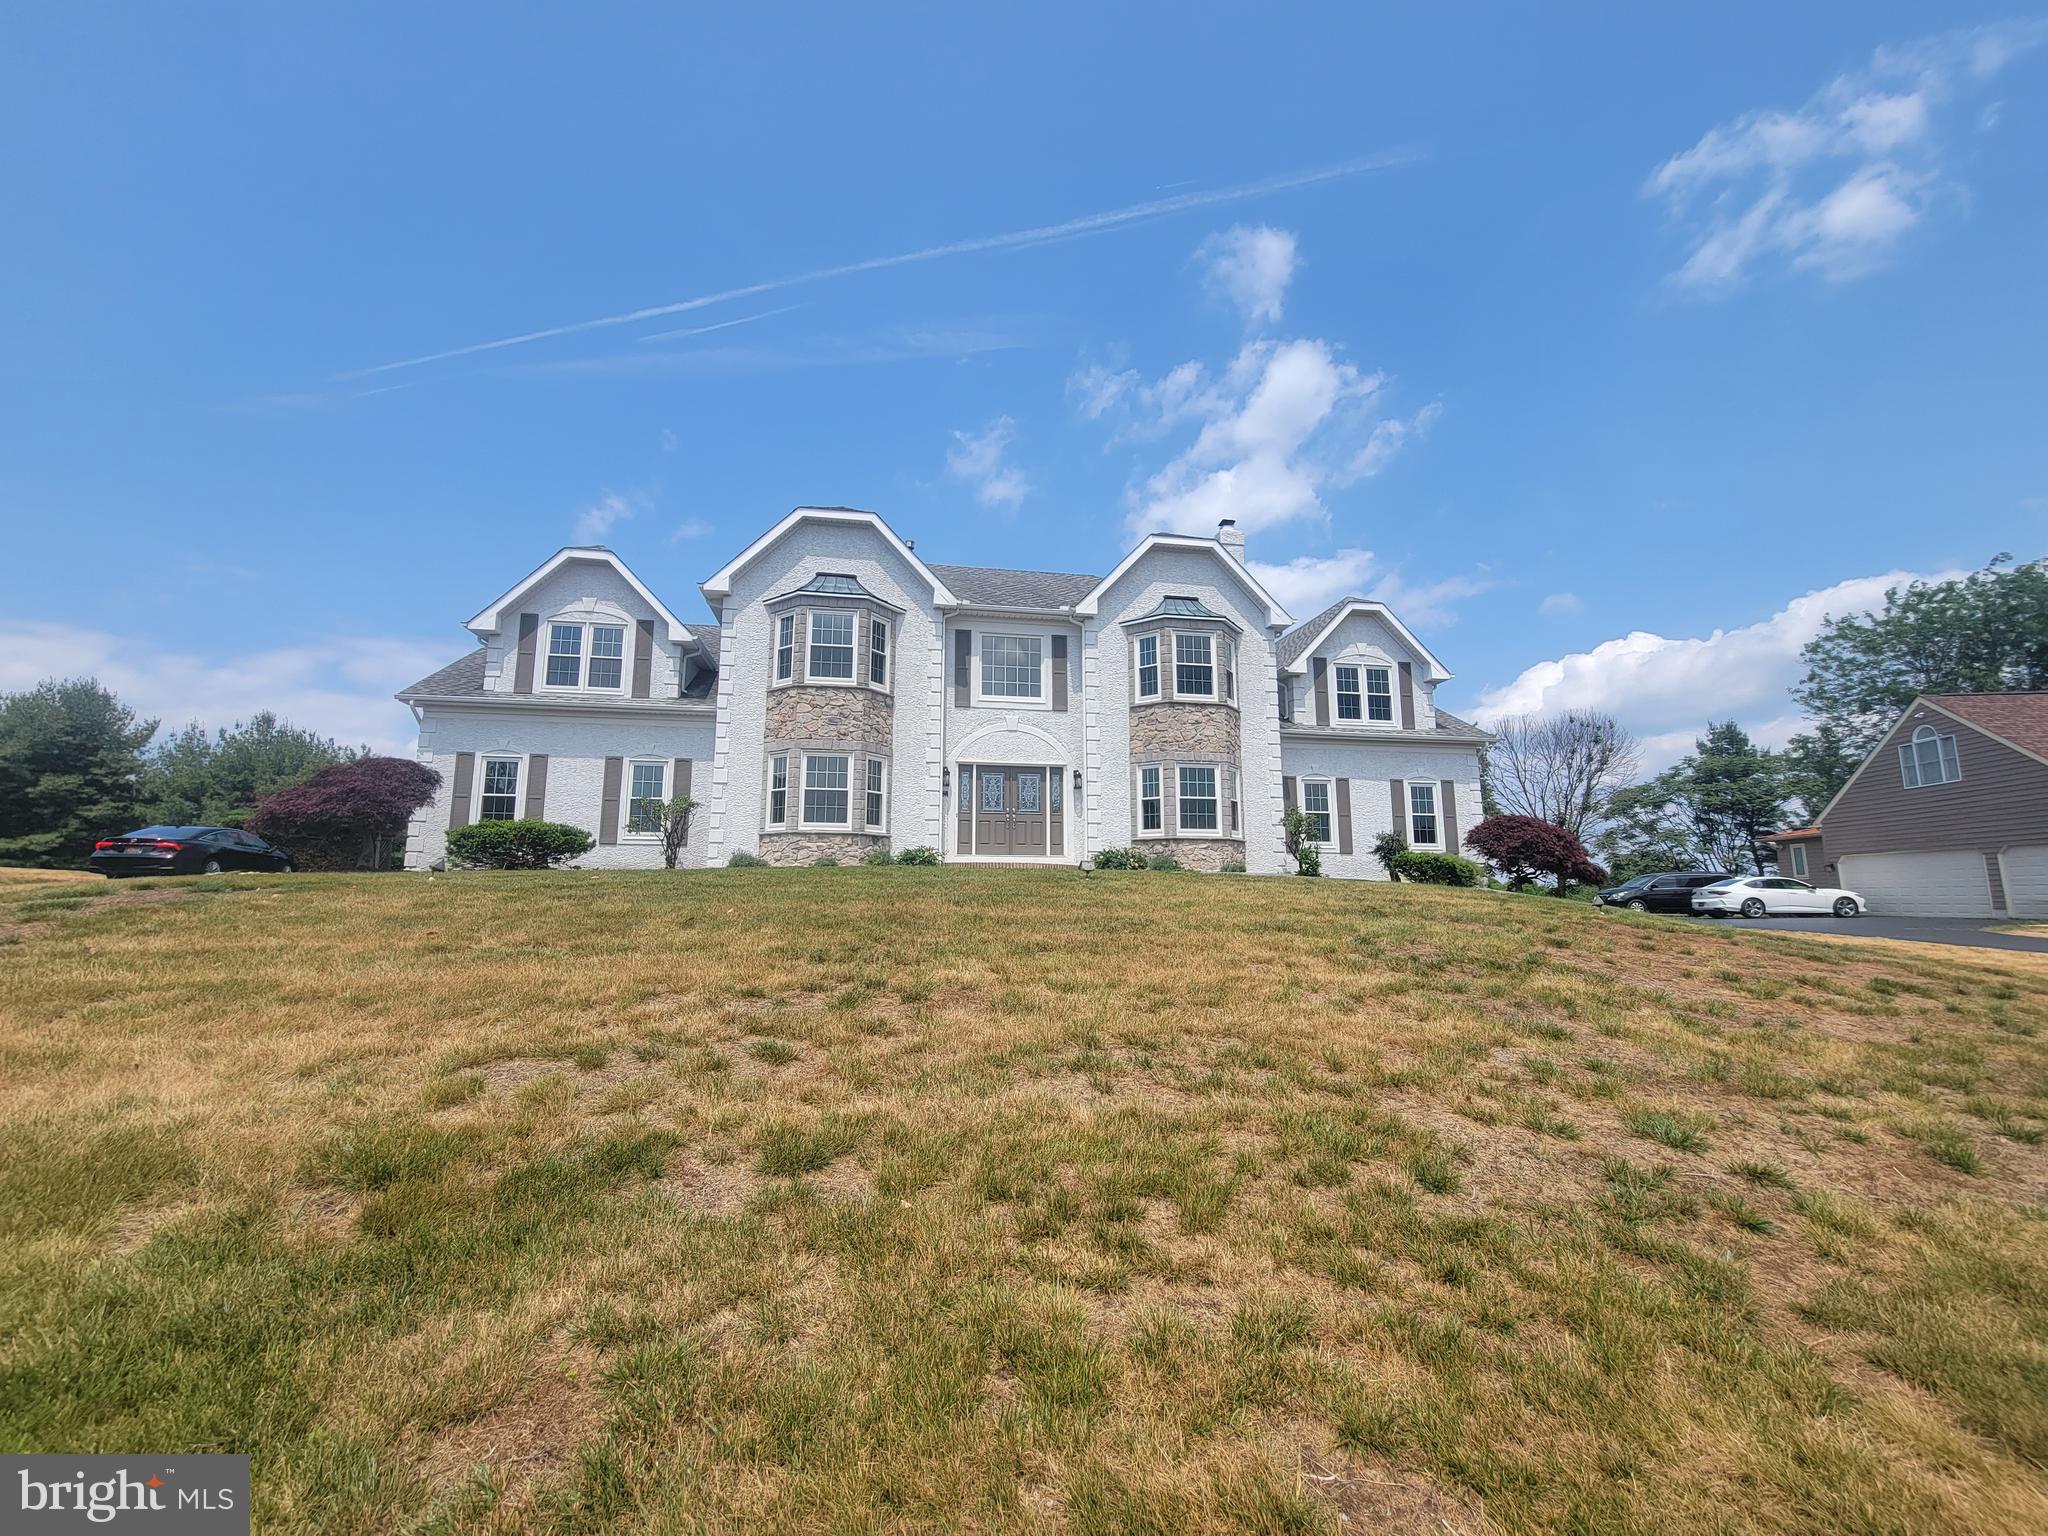 12 Foxview Circle  Home Listings - John and Mary Luca Hockessin, Greenville, Newark, Middletown, Bear, North Wilmington, Wilmington, Brandywine Hundred, Pike Creek, Smyrna, Townsend, Dover, Rehoboth, Bethany, Lewes, Milford, Malvern, Avondale, Landenberg